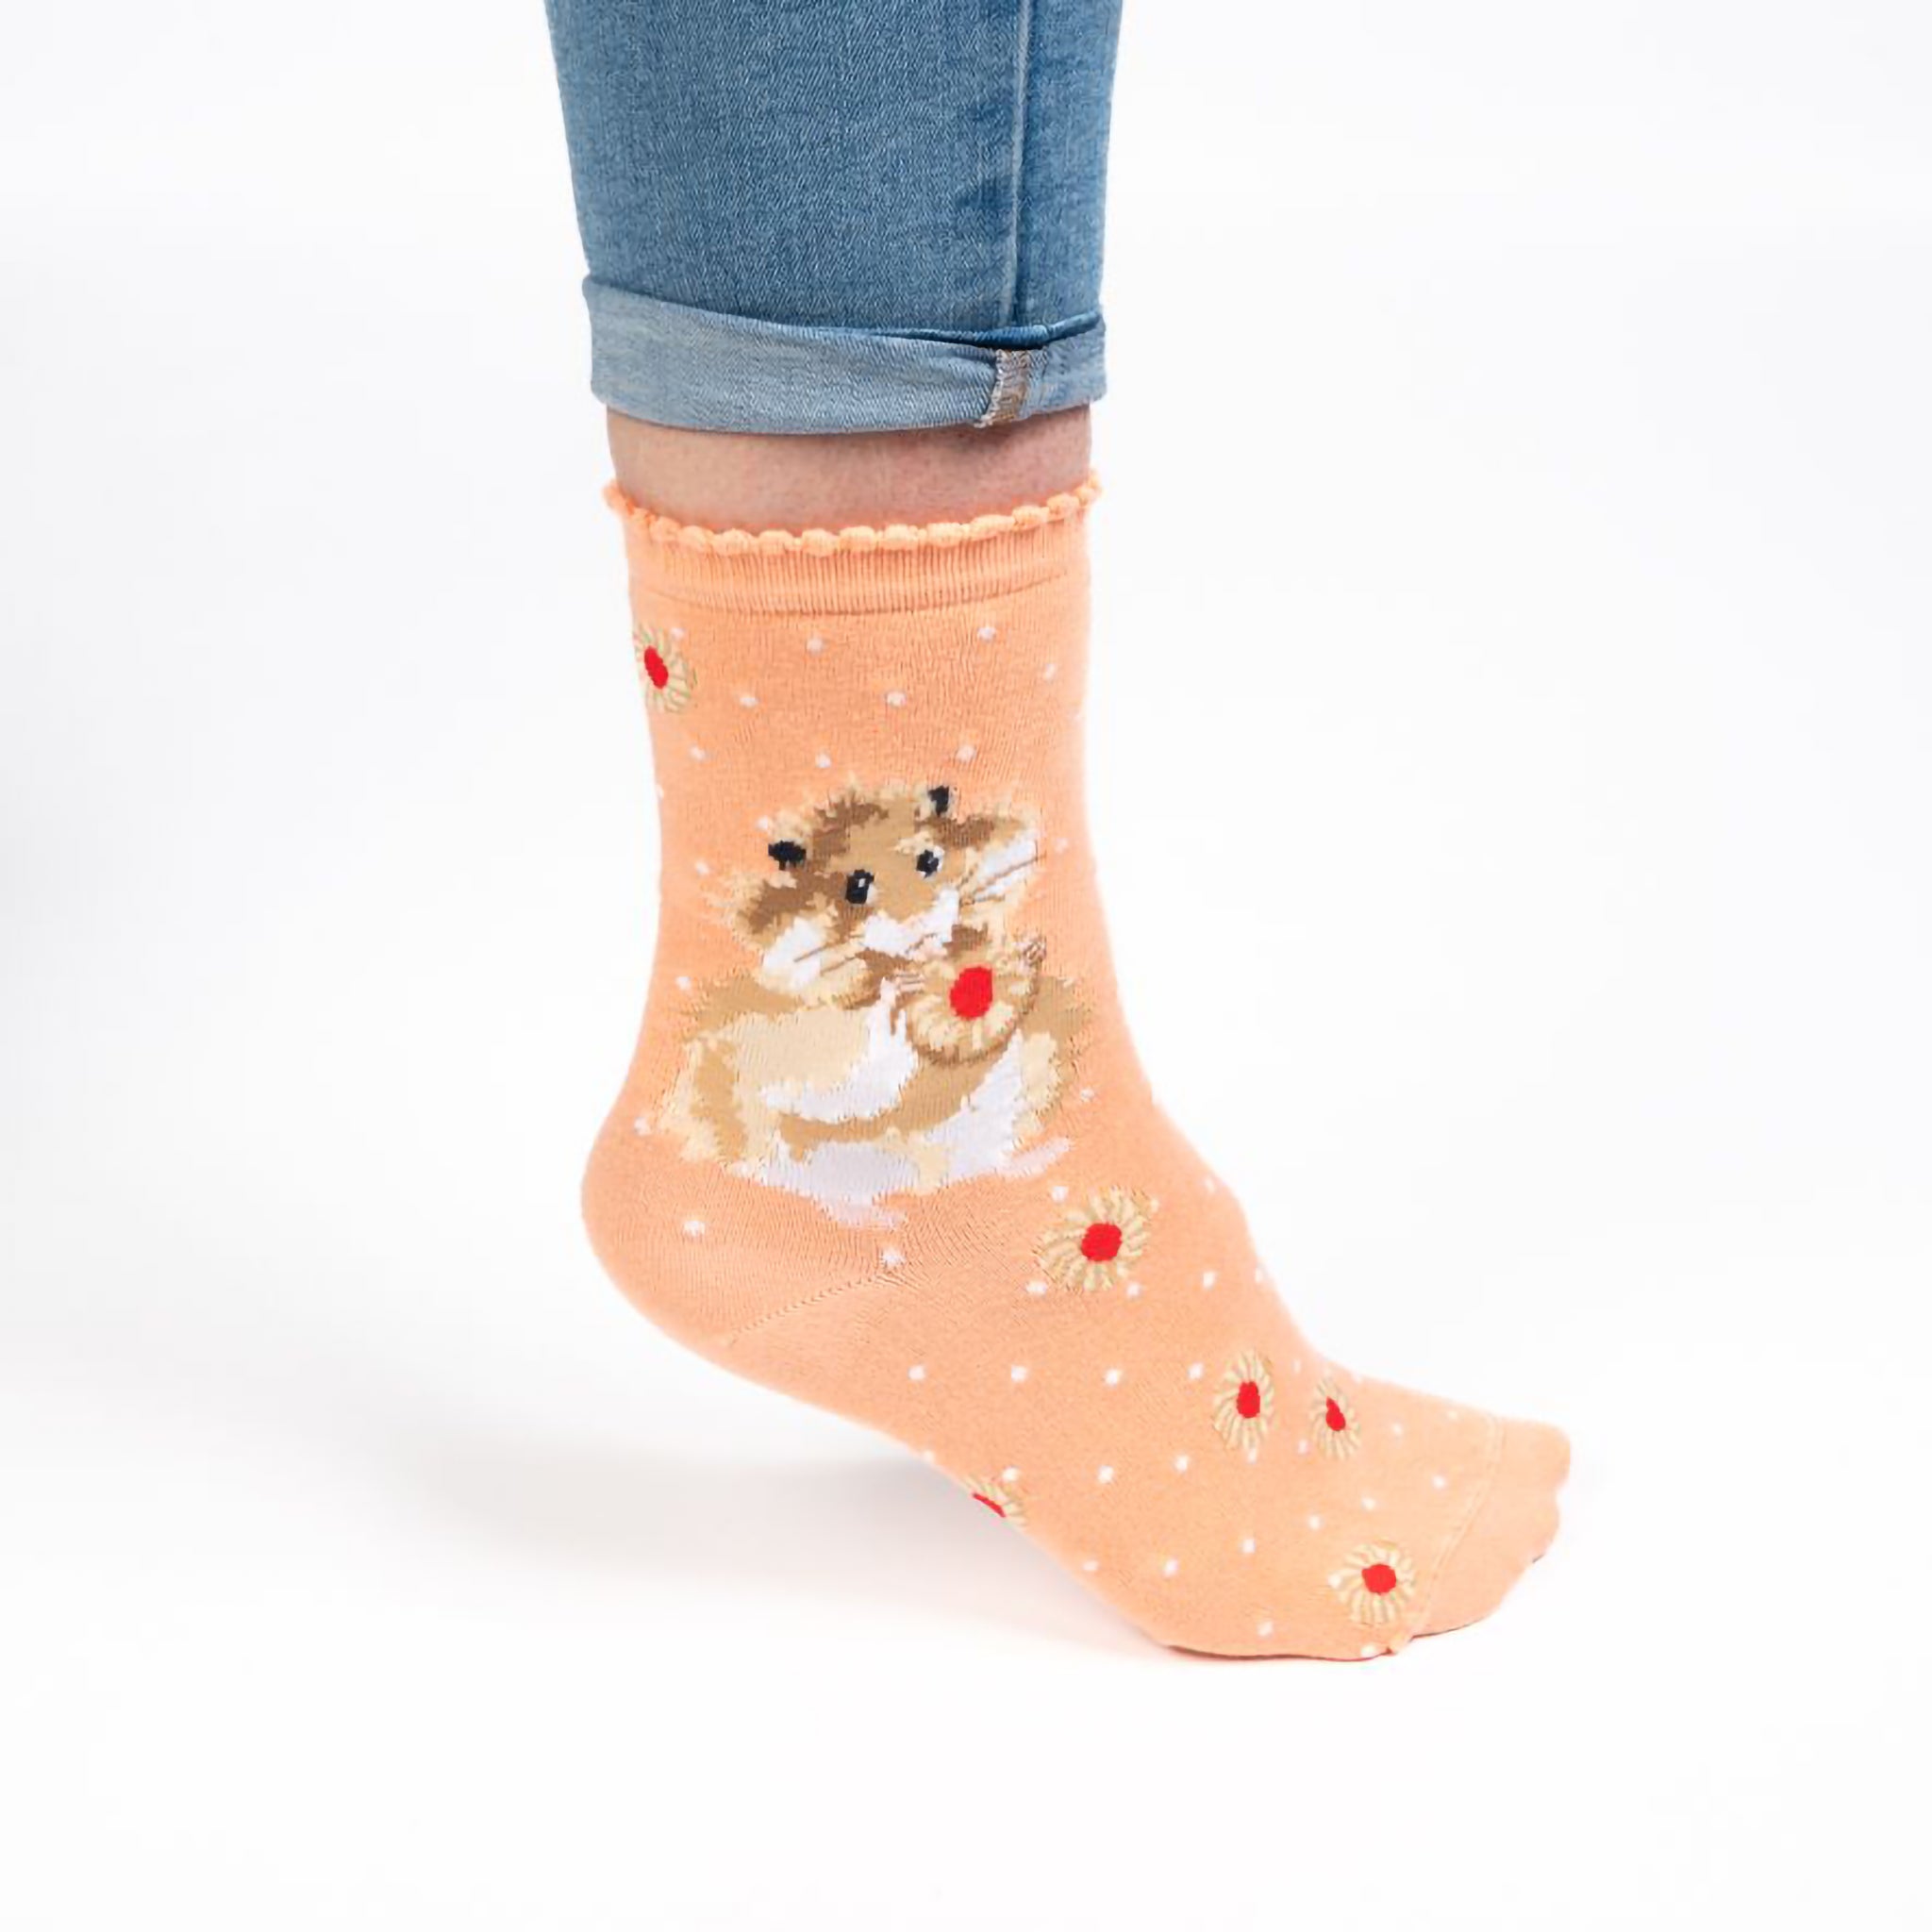 Model wearing a pair of pink socks with a hamster and jam filled biscuits picture and white polka dots